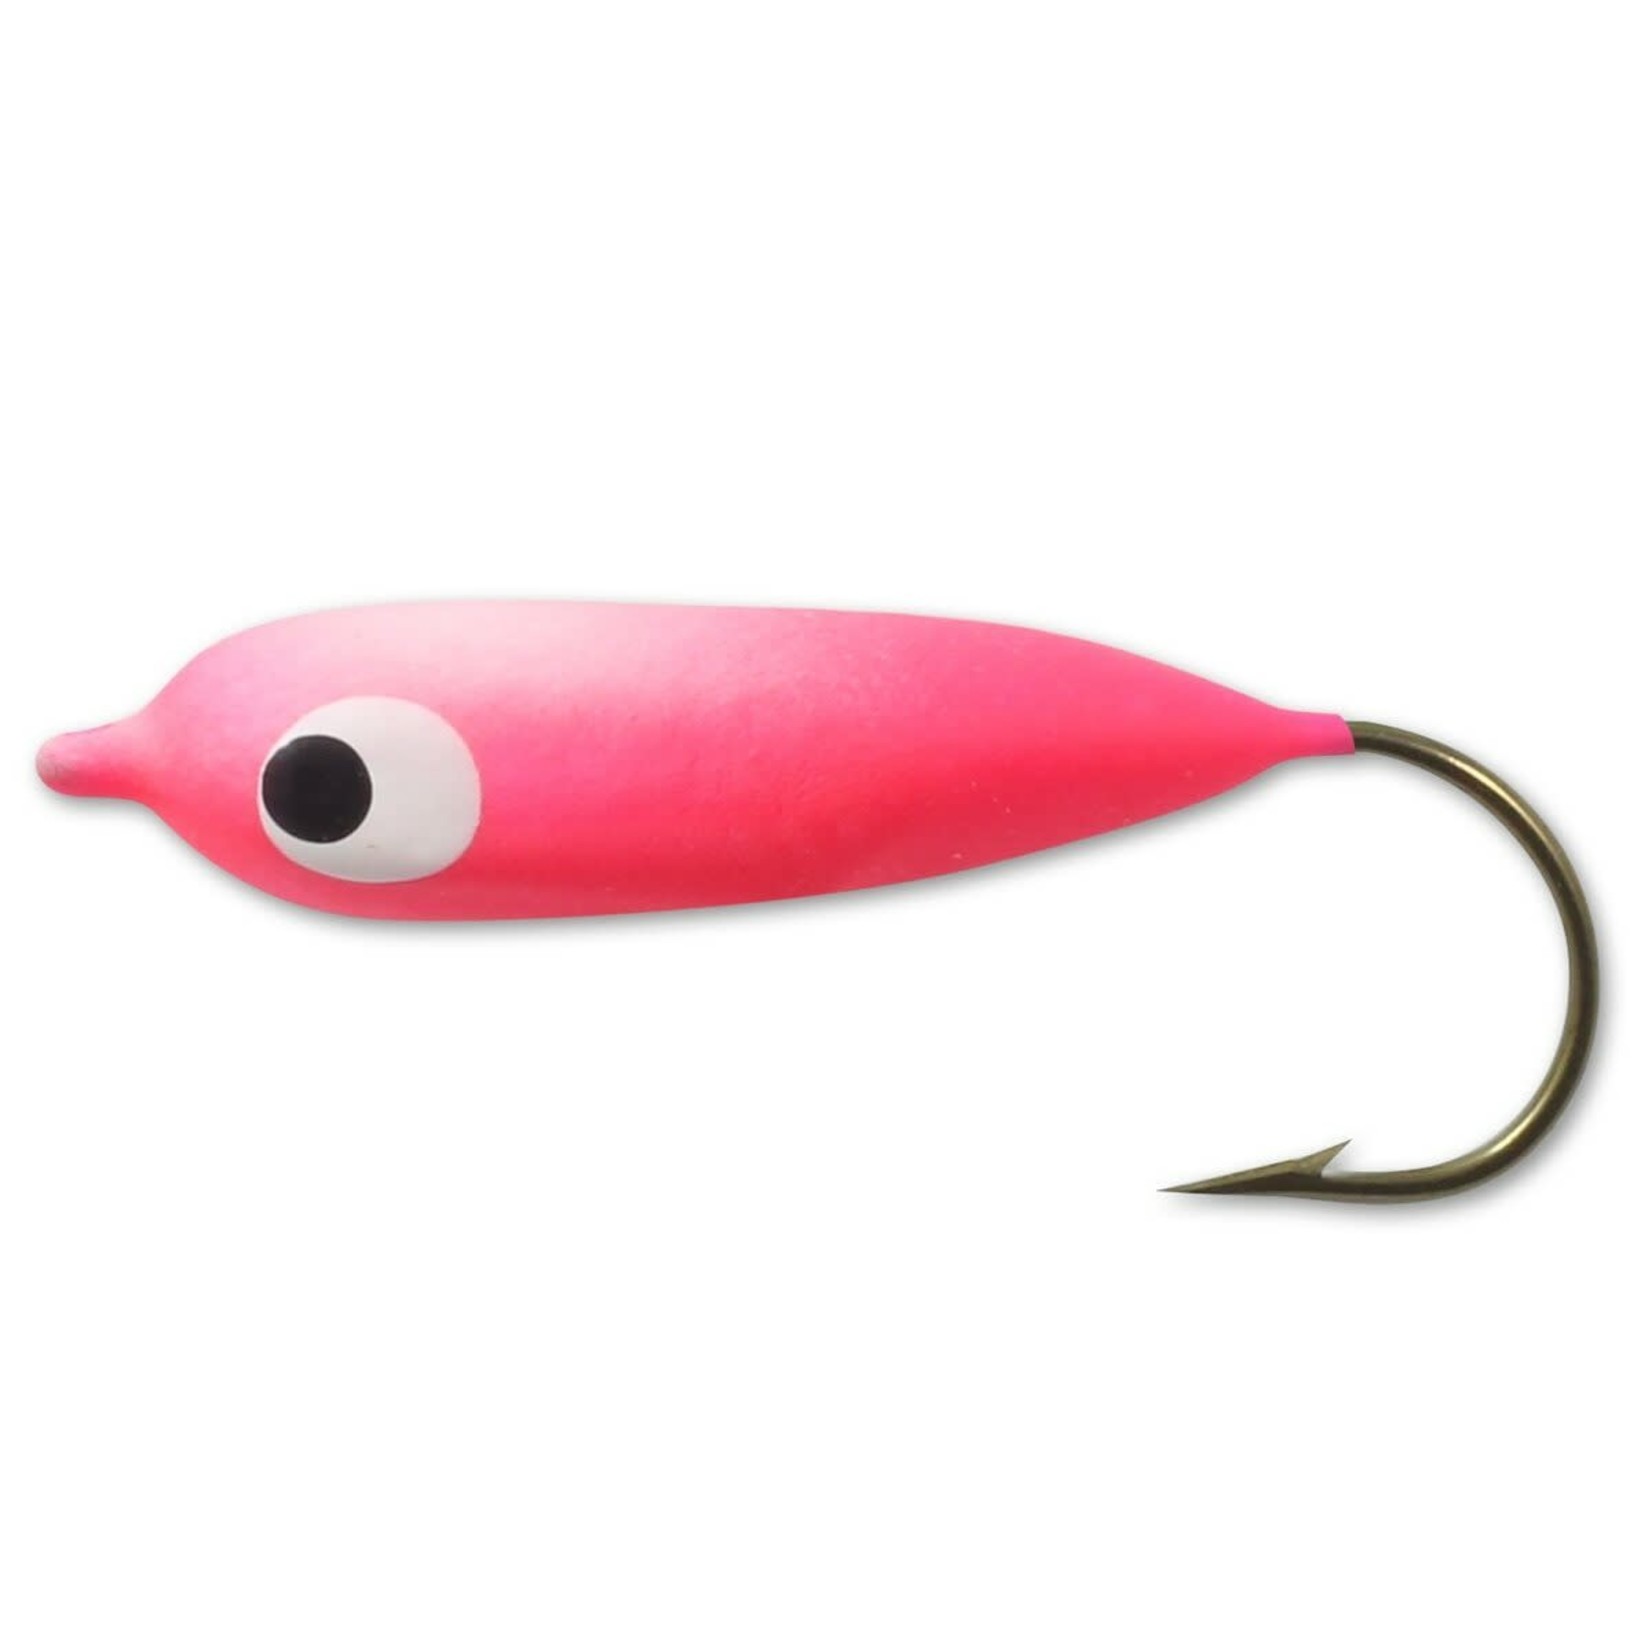 Northland Fishing Tackle Northland Gum-Drop Floater